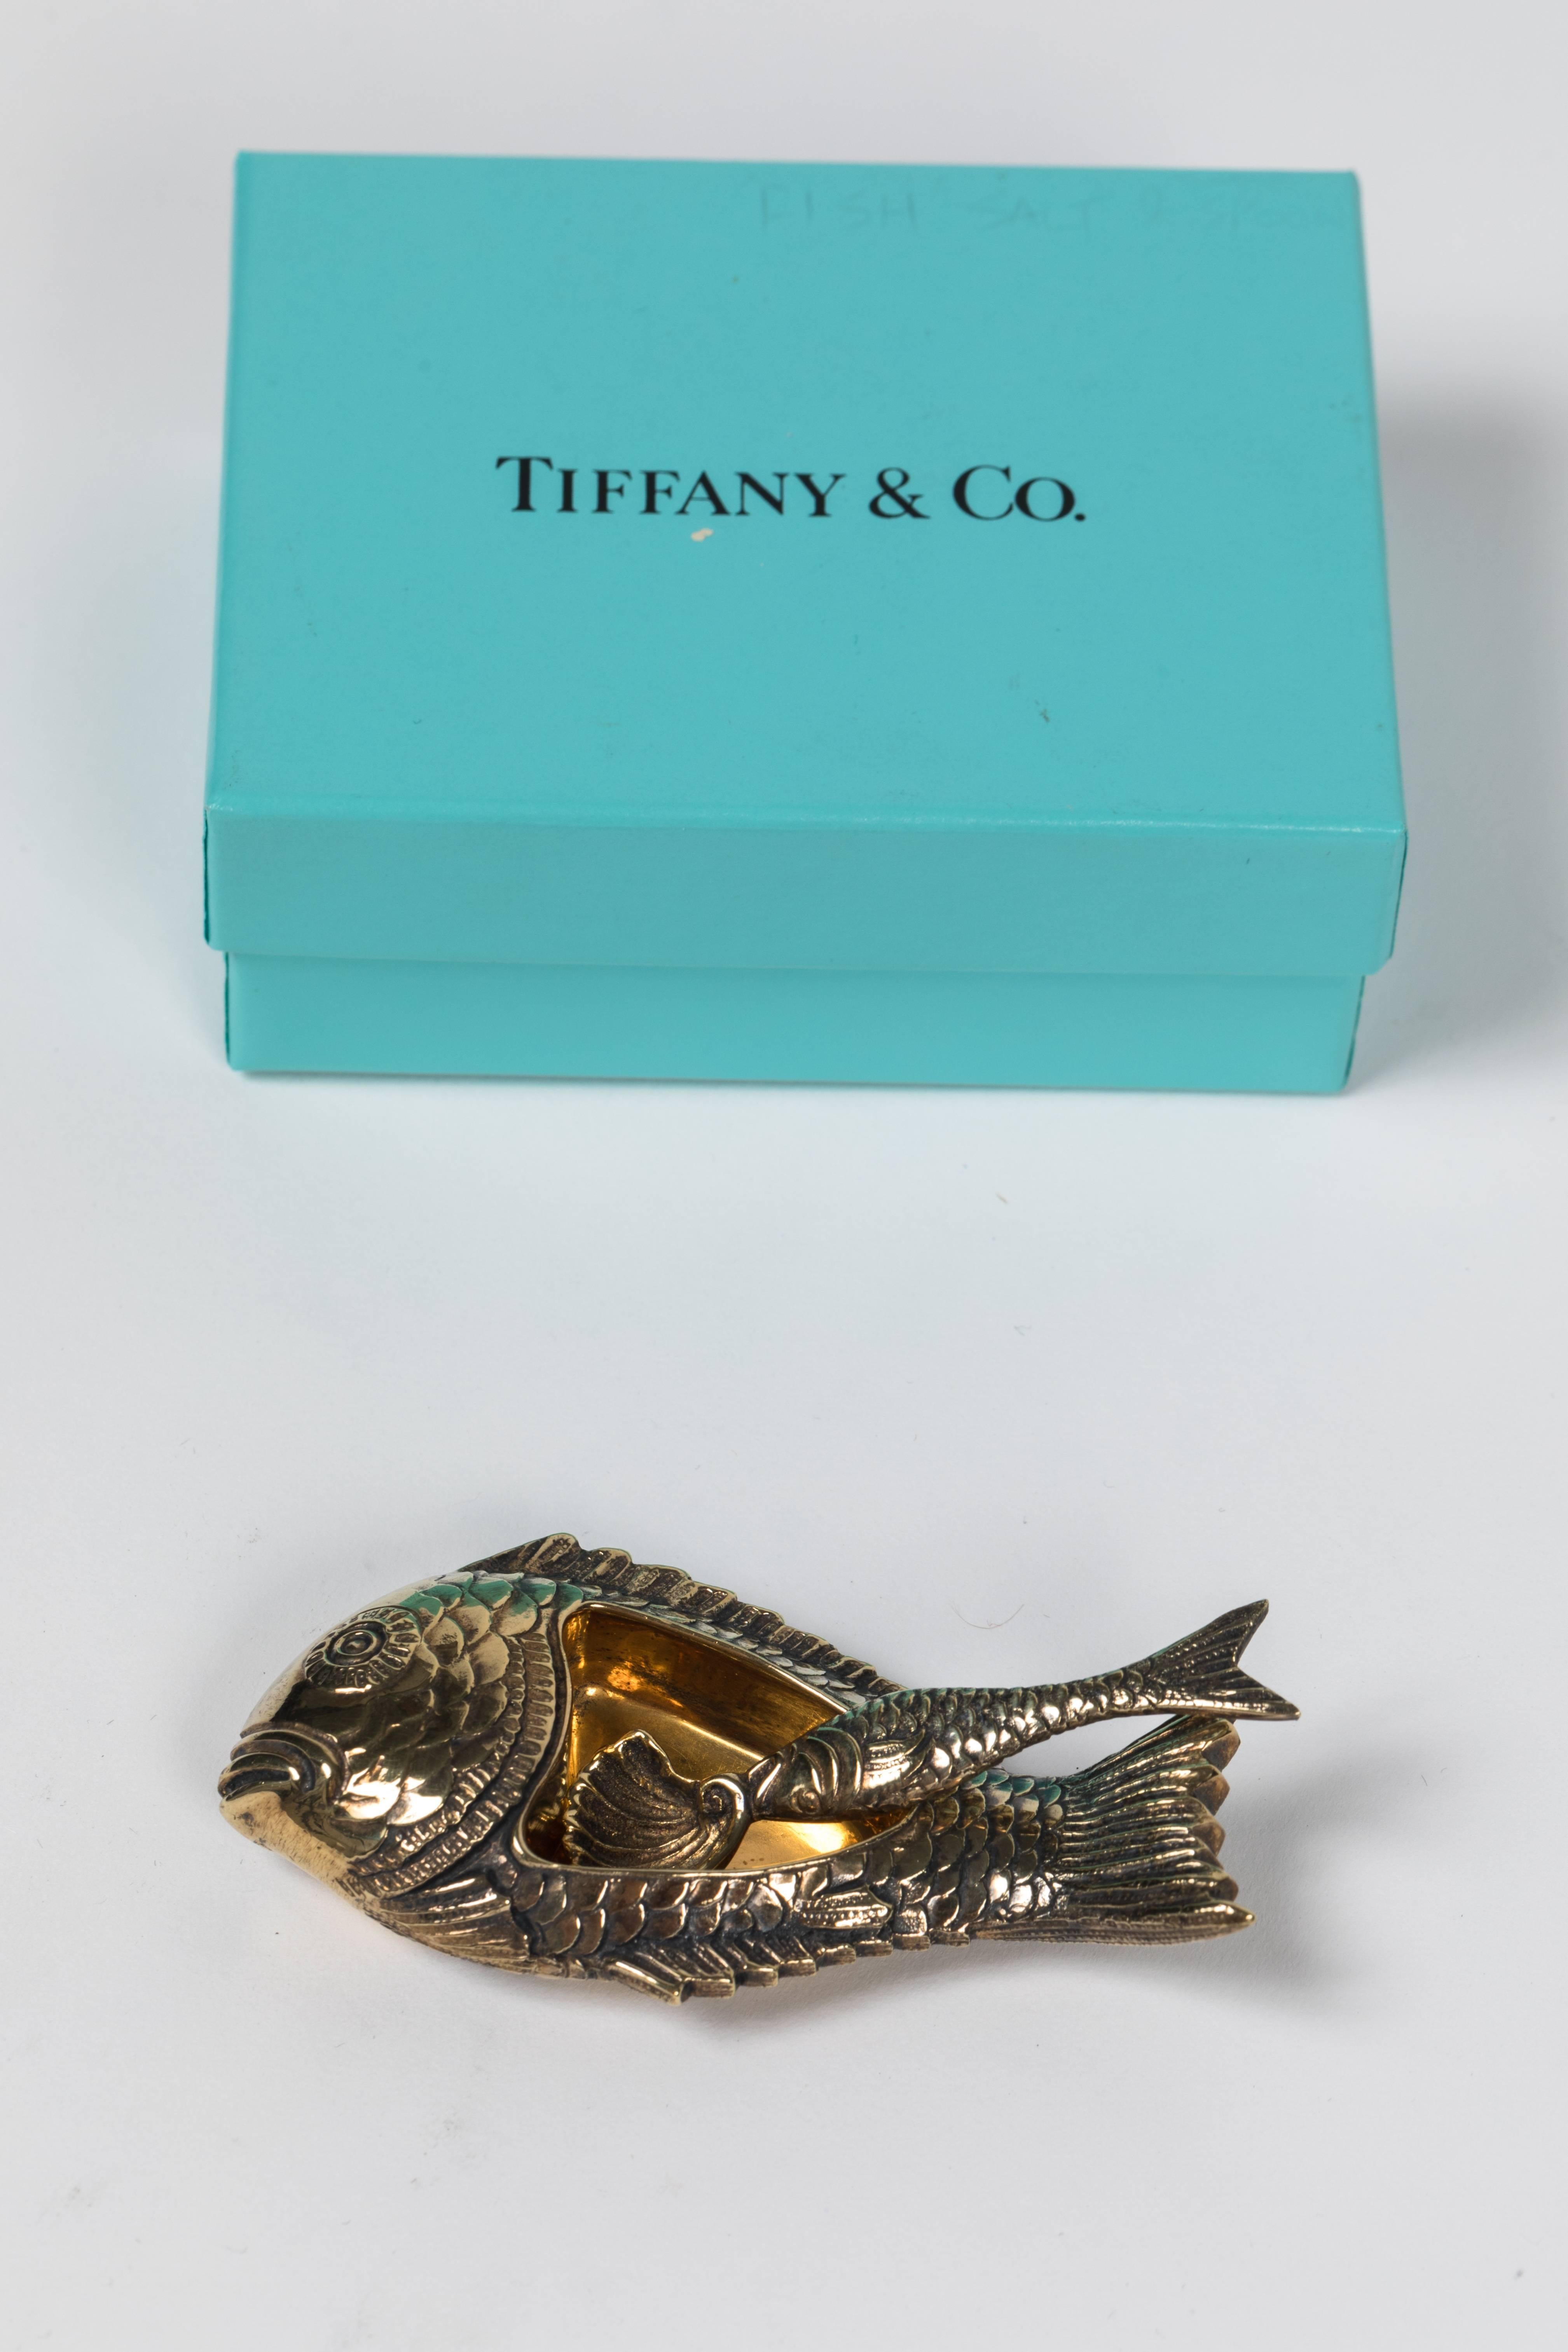 A vintage, yet timeless salt or spice dish in designed as a fish with a matching spoon. Stamped 